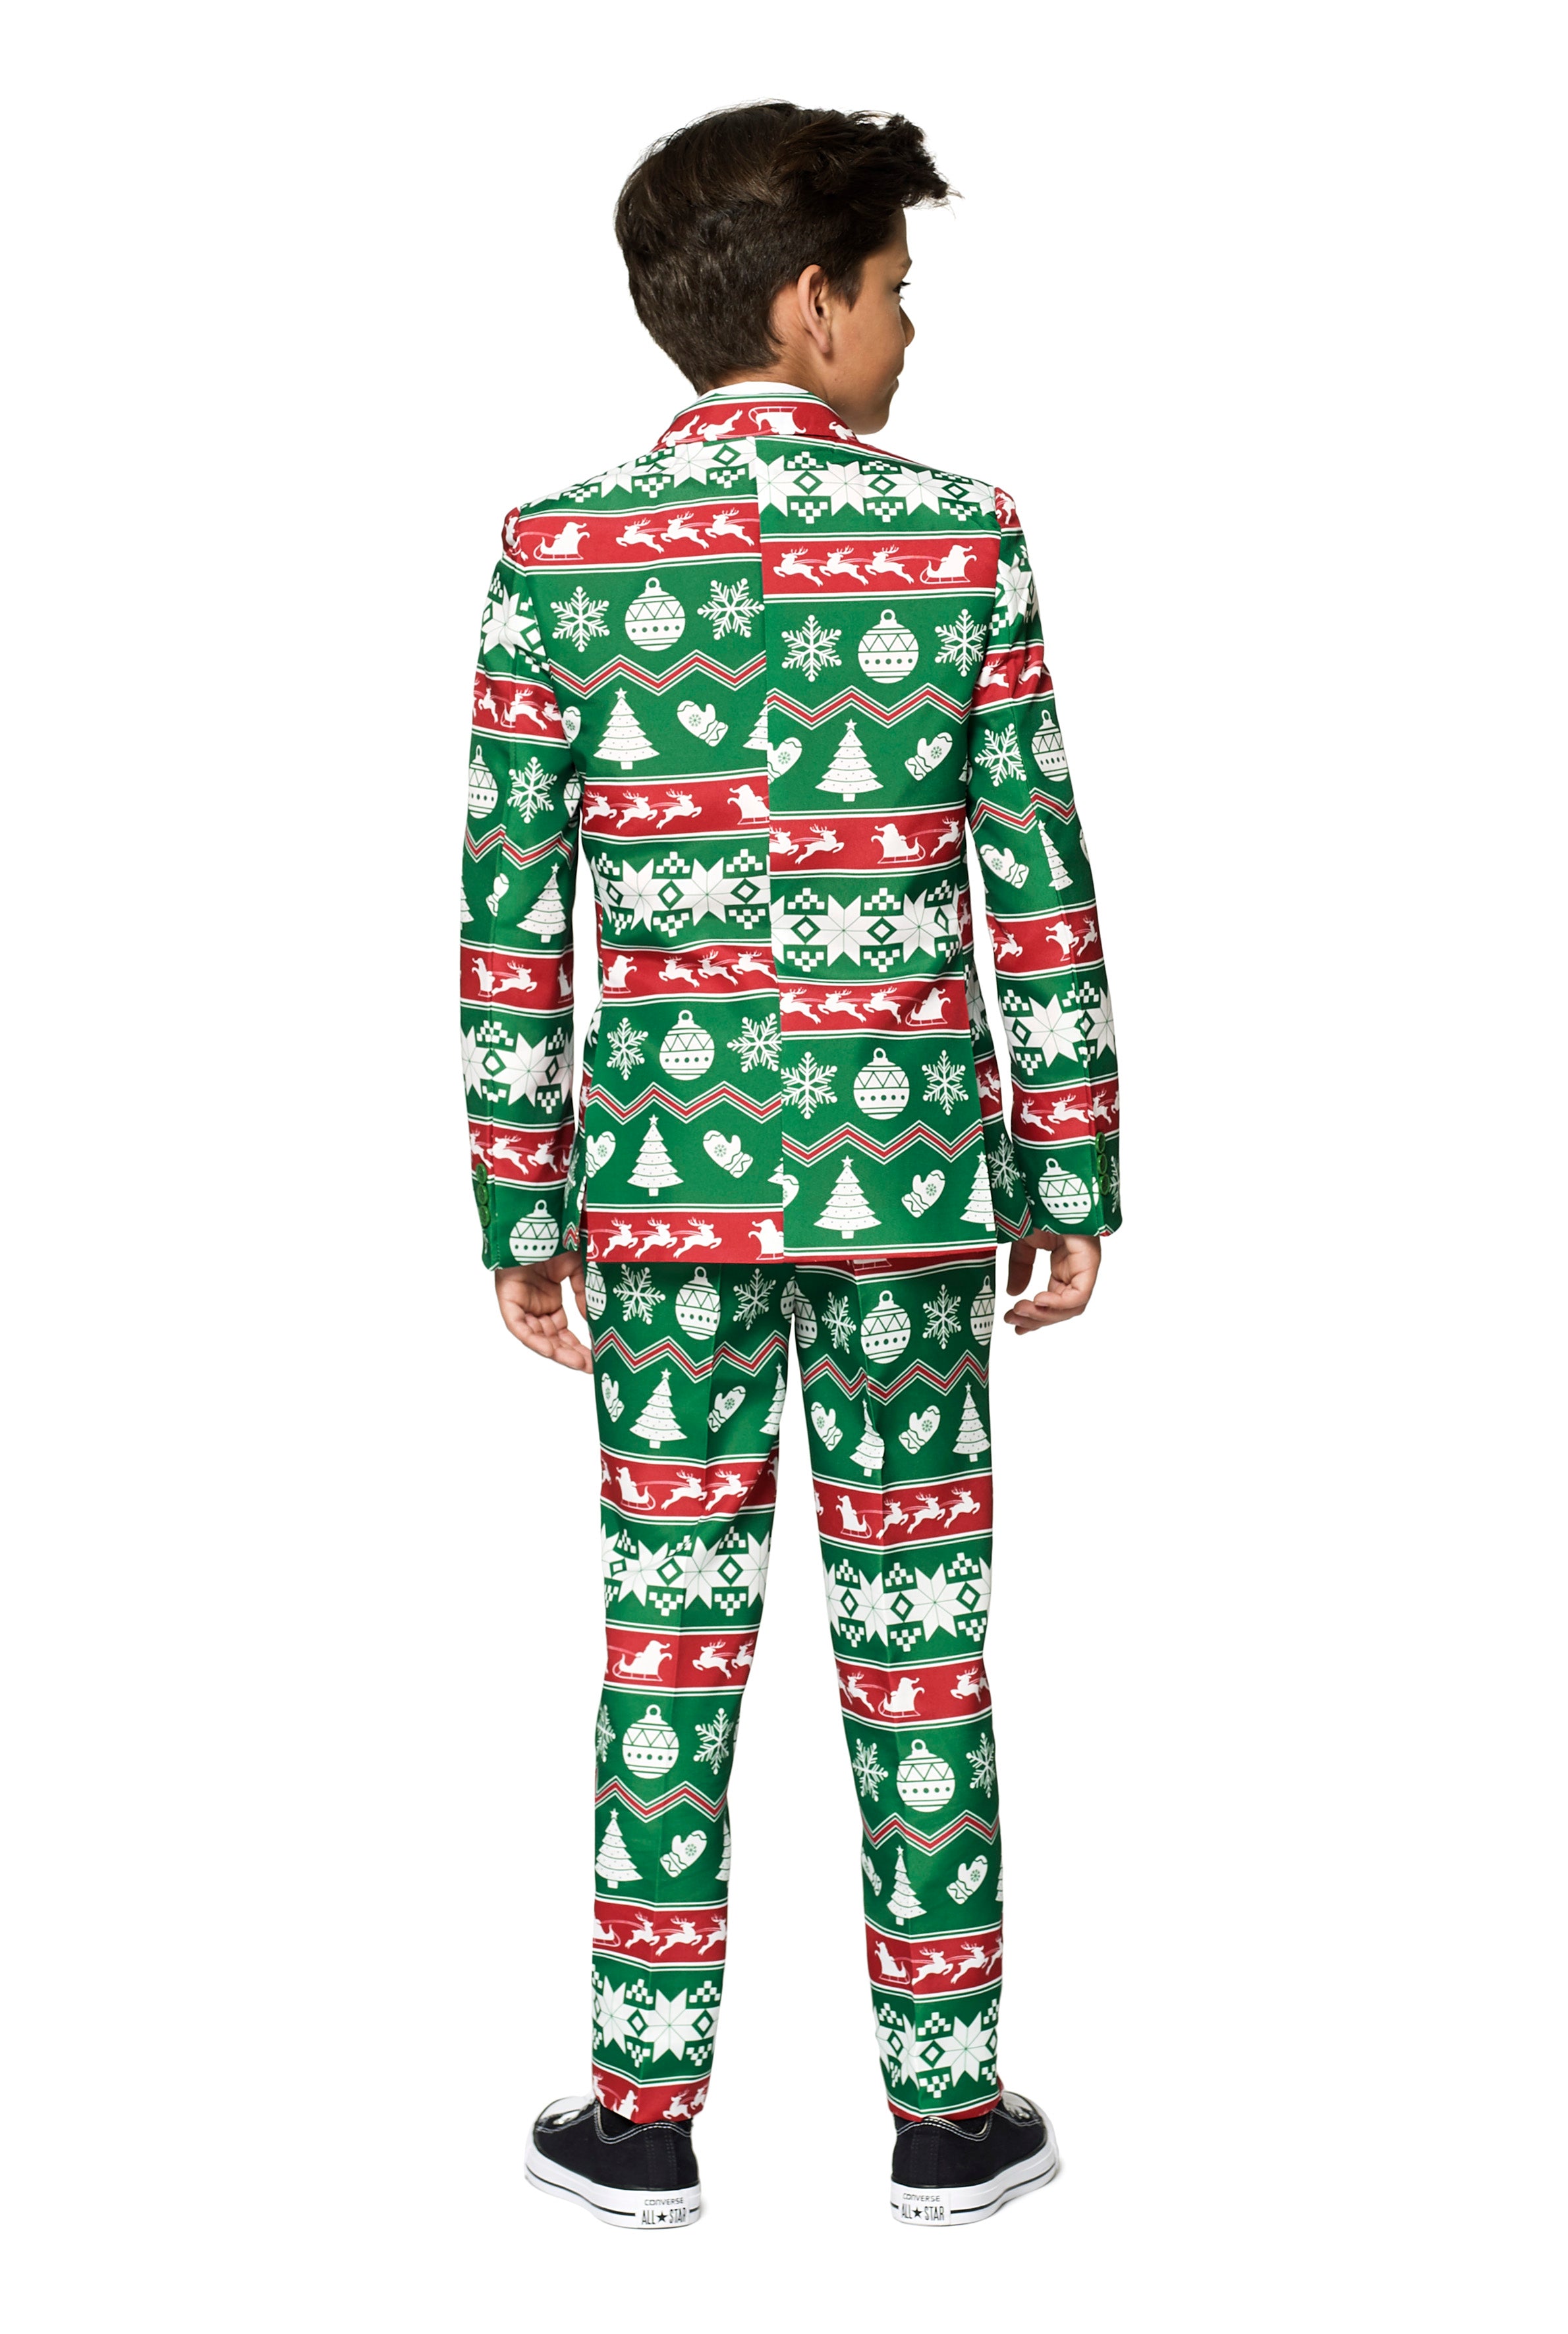 Costume Suitmeister BOYS Christmas Green Nordic